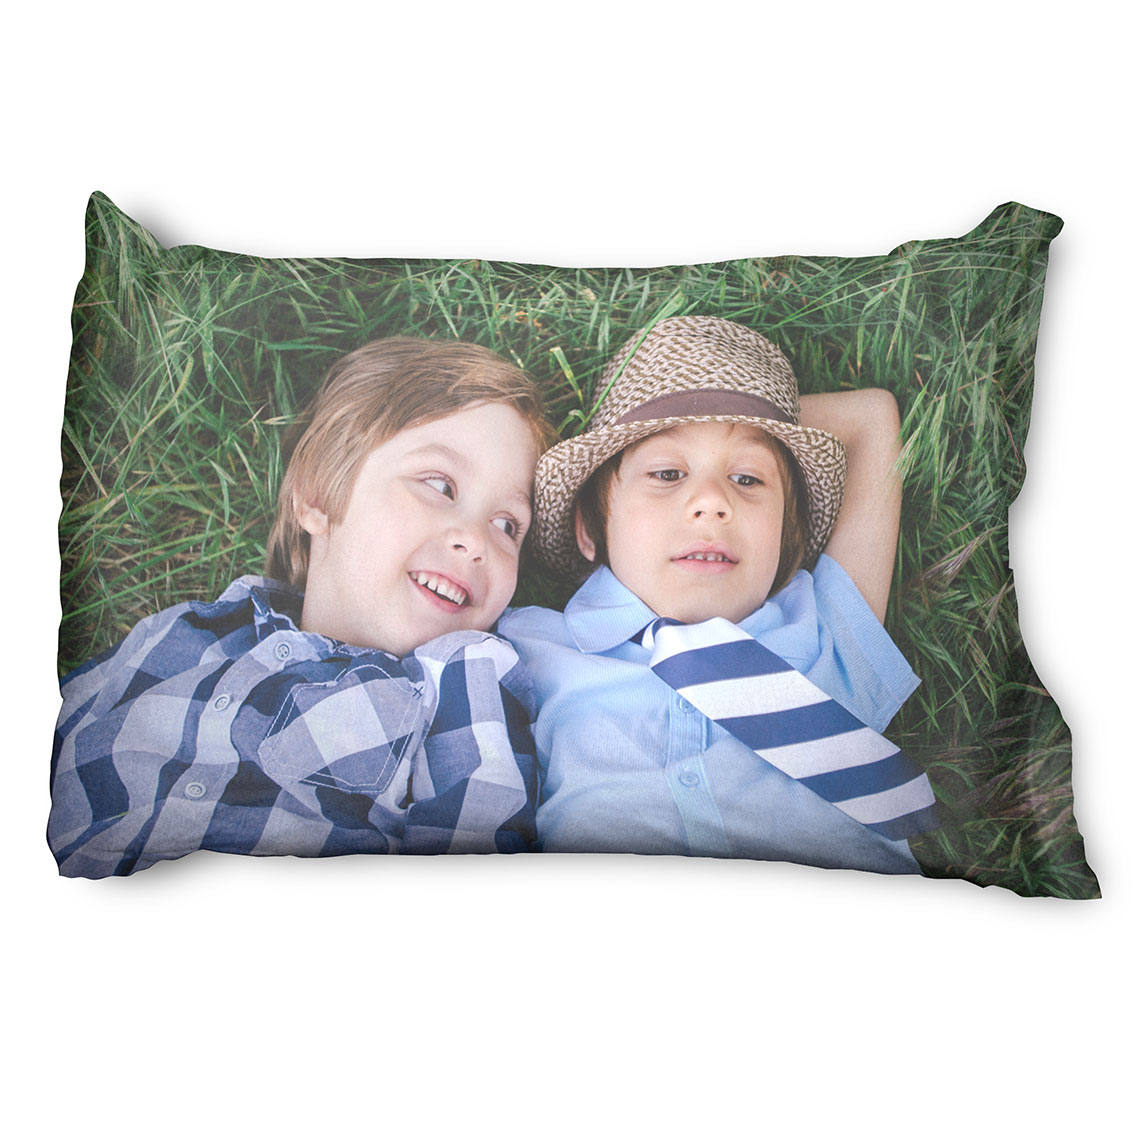 Personalised Photo Pillowcase Cushion Pillow Case Cover Linen Custom Gift 